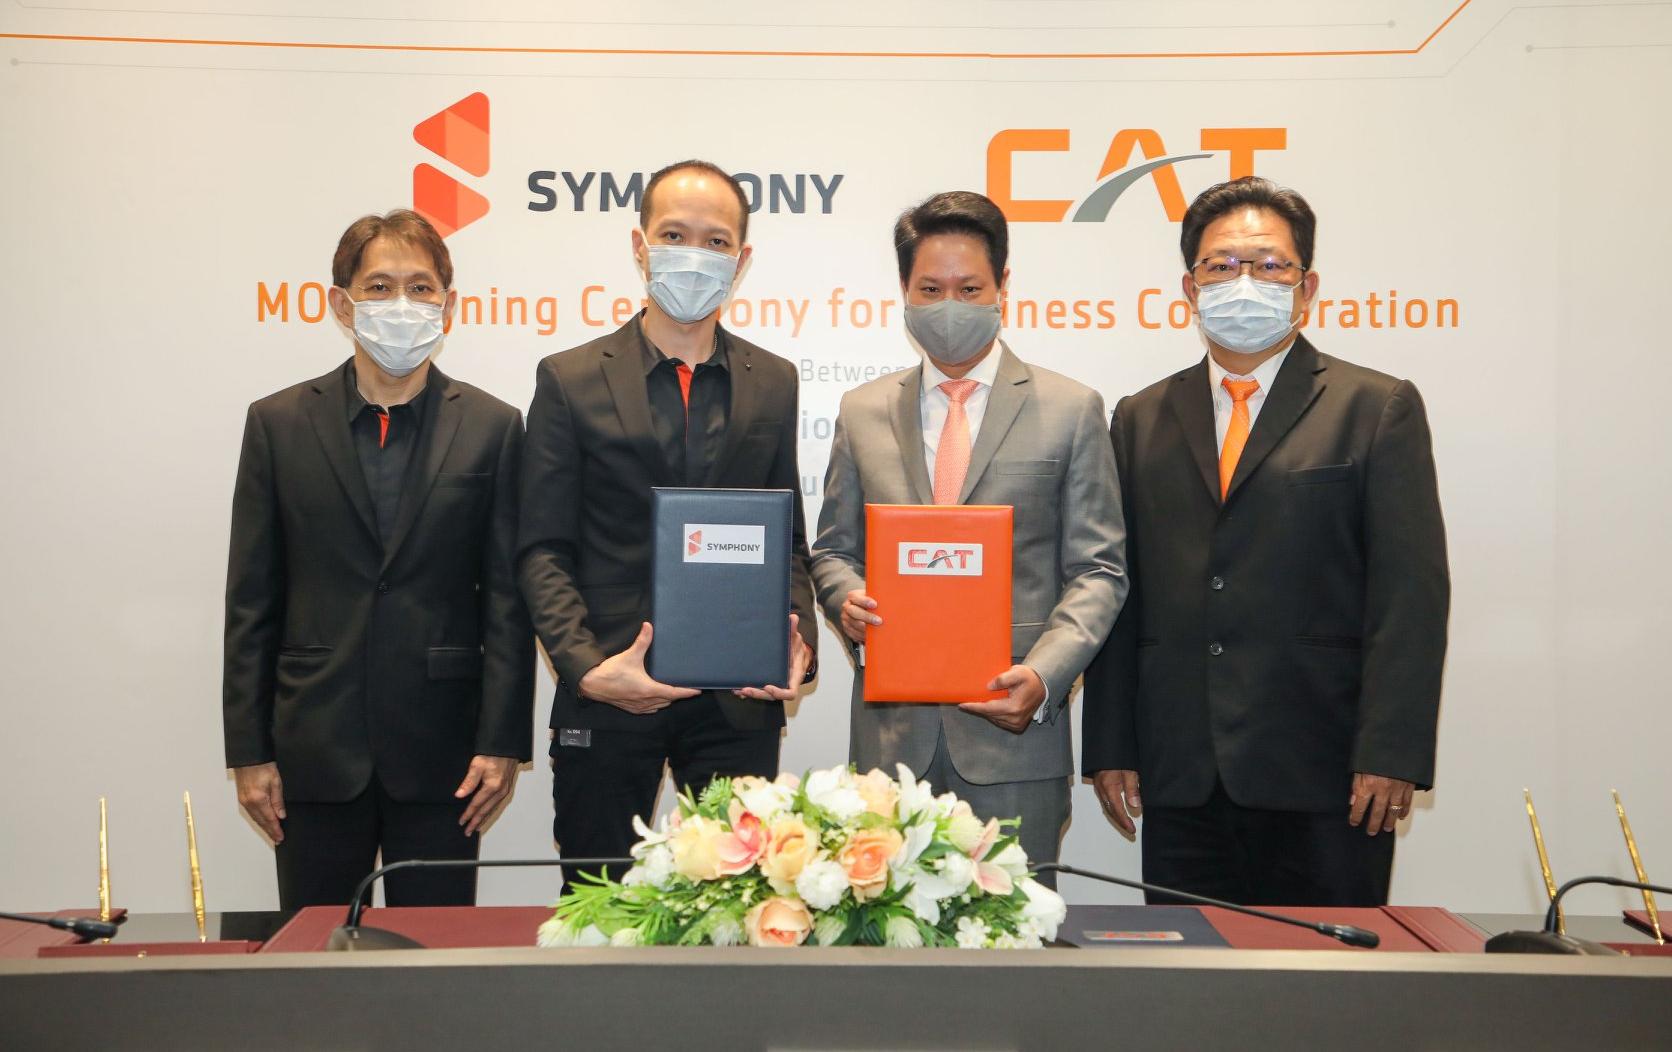 CAT joins hands with SYMPHONY to provide telecommunication networks and services to meet the needs of customers in the digital age.